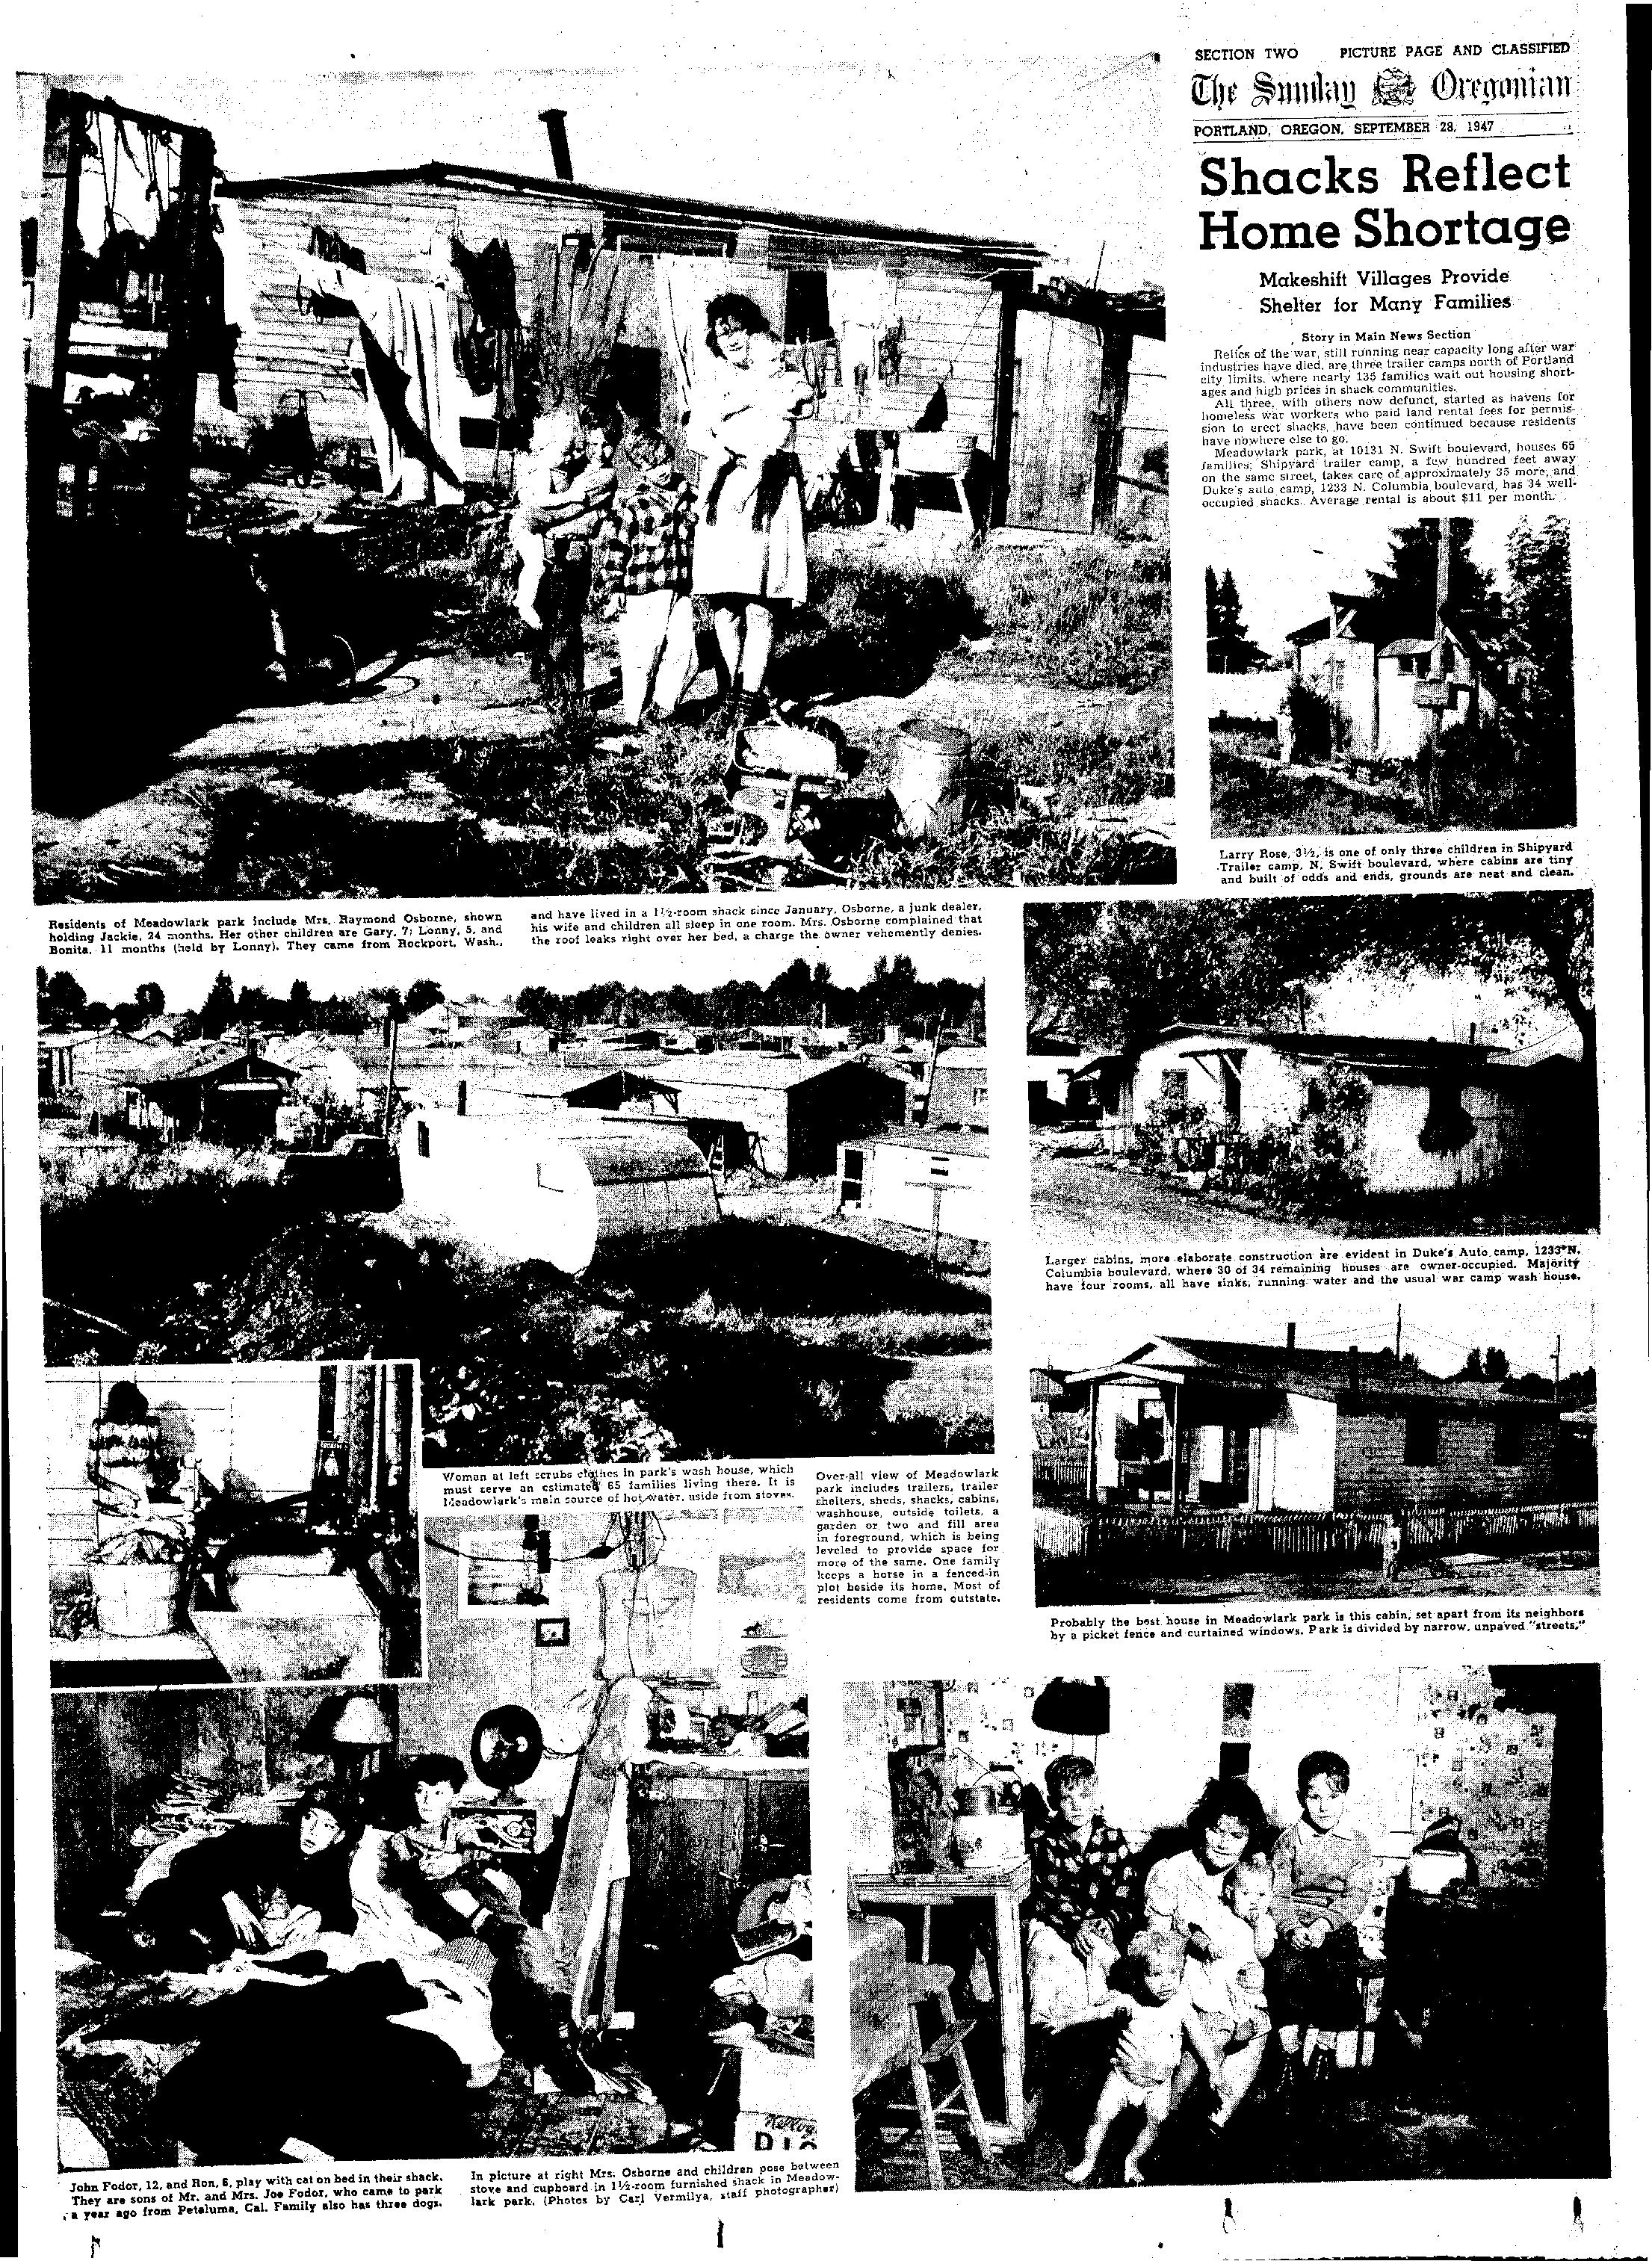 September 28, 1947 Columbia Blvd trailer camps 02-page-001